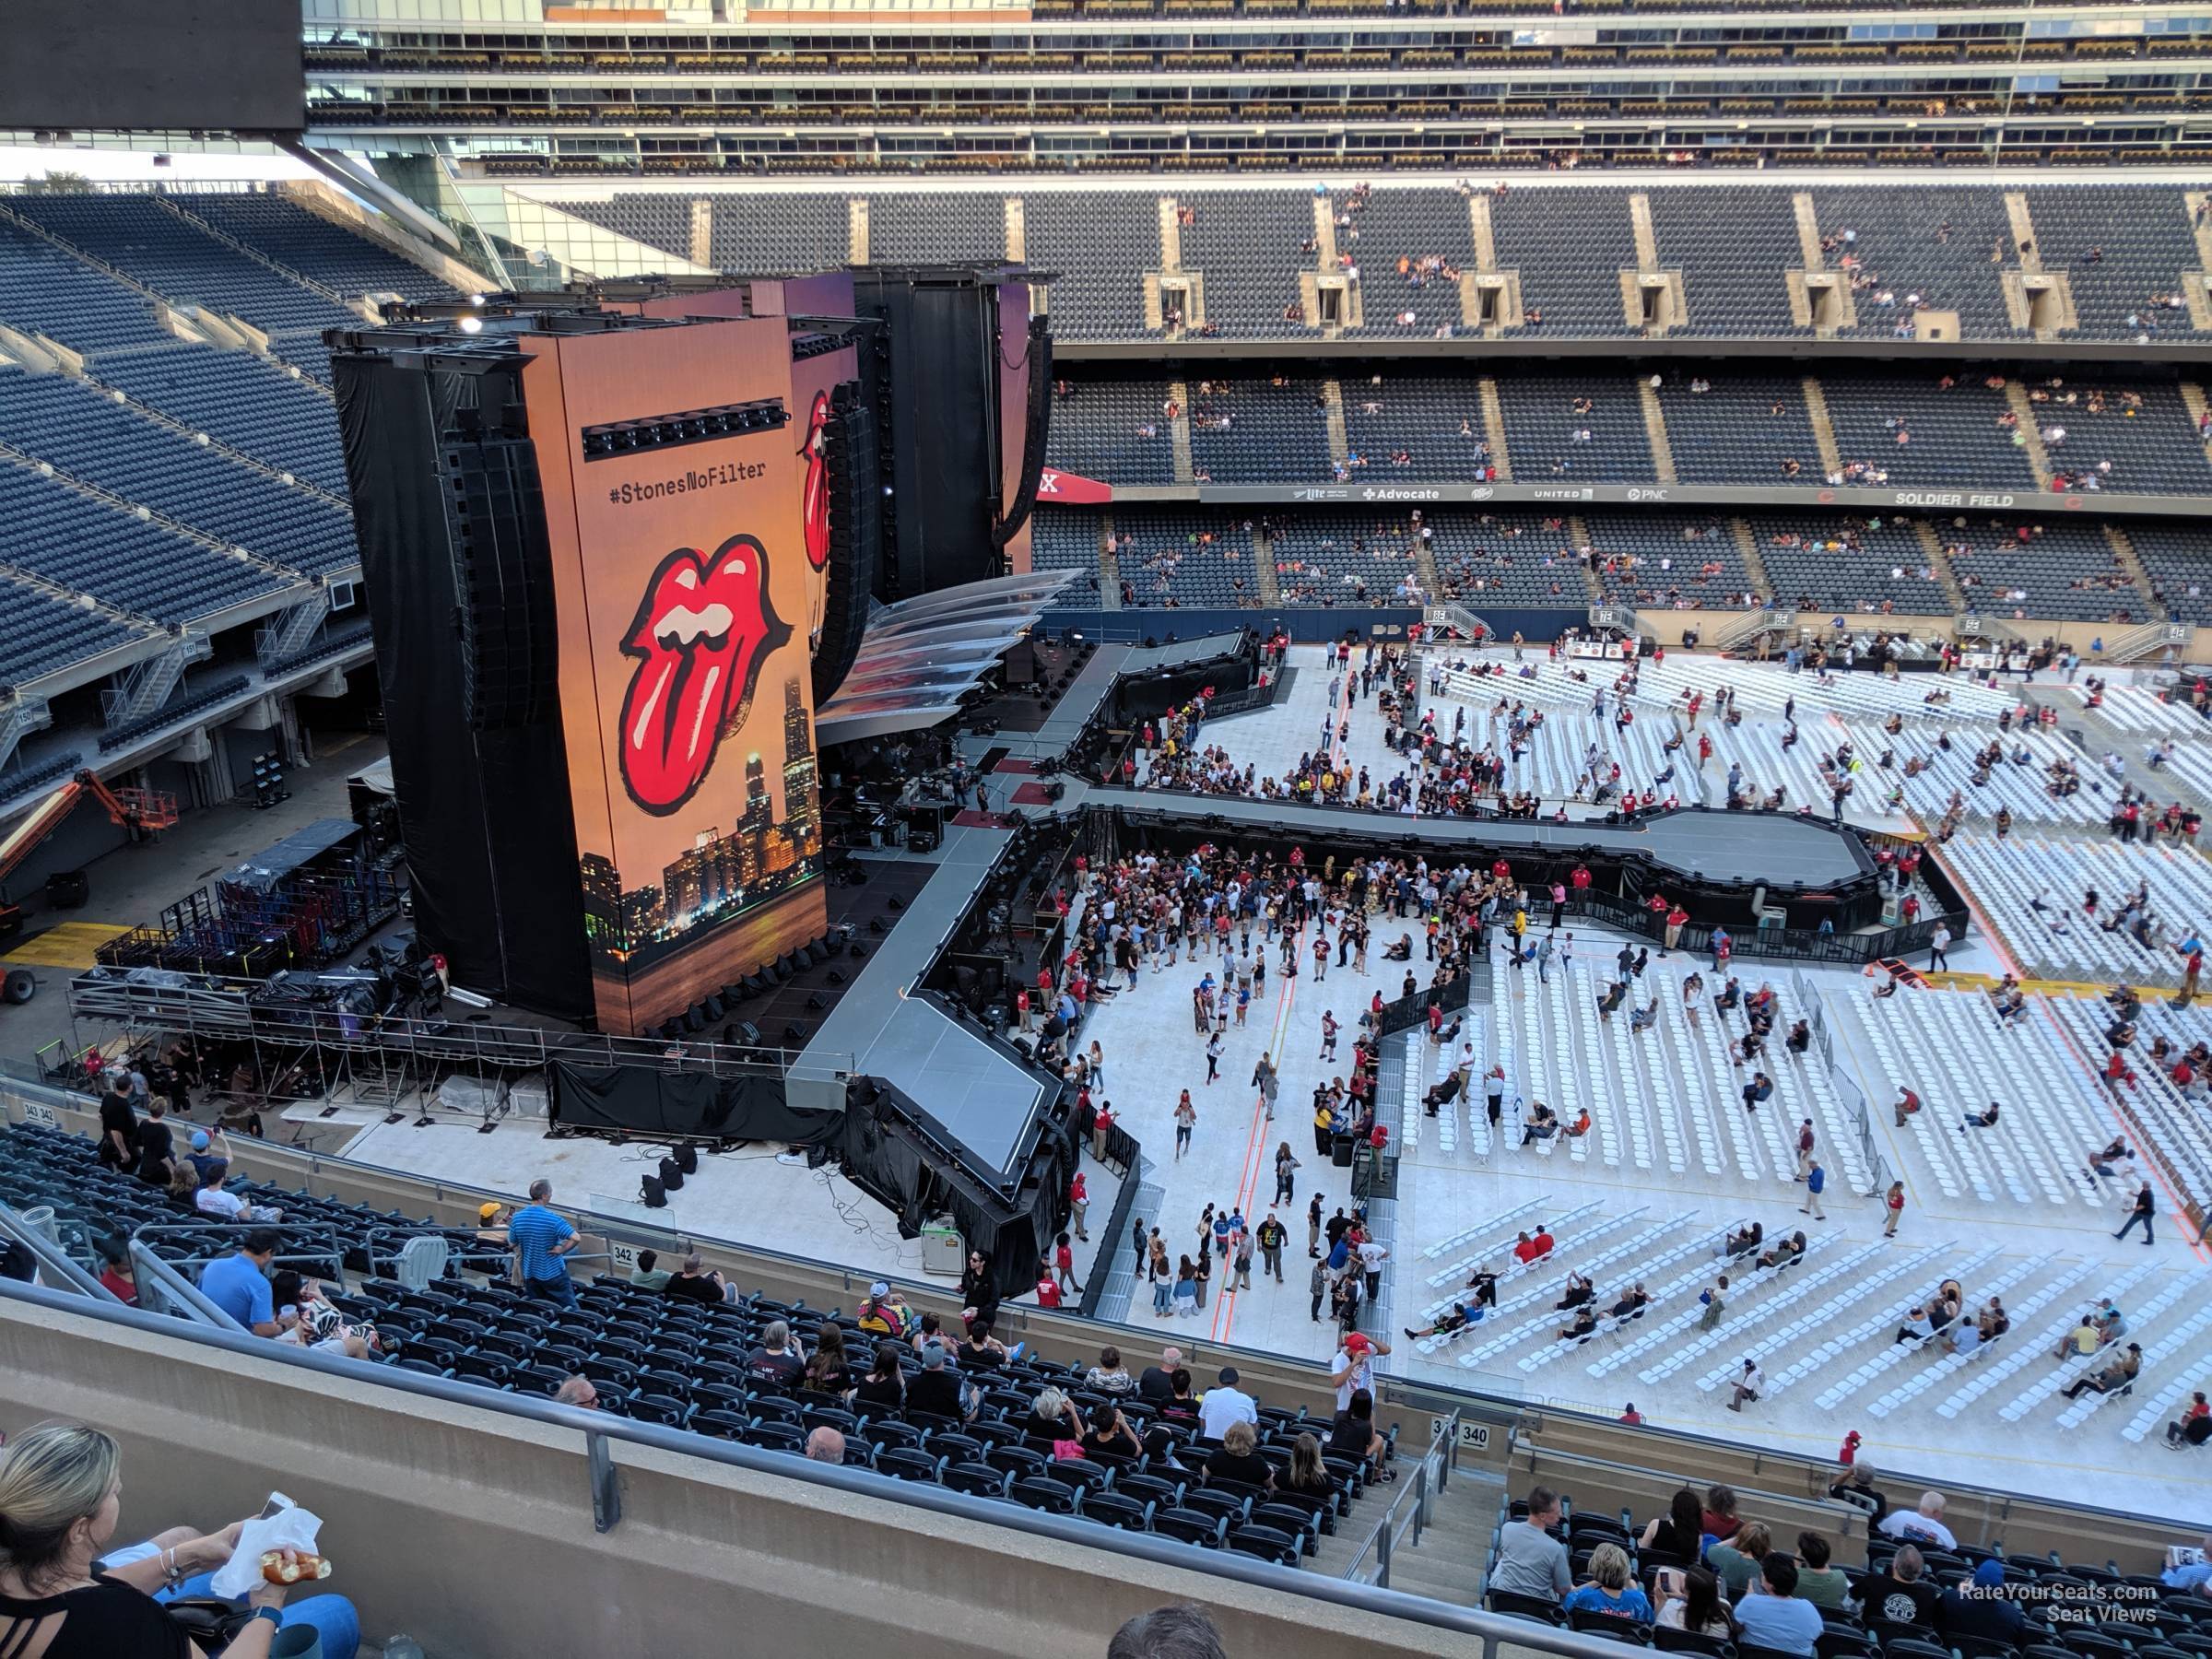 Section 440 at Soldier Field for Concerts